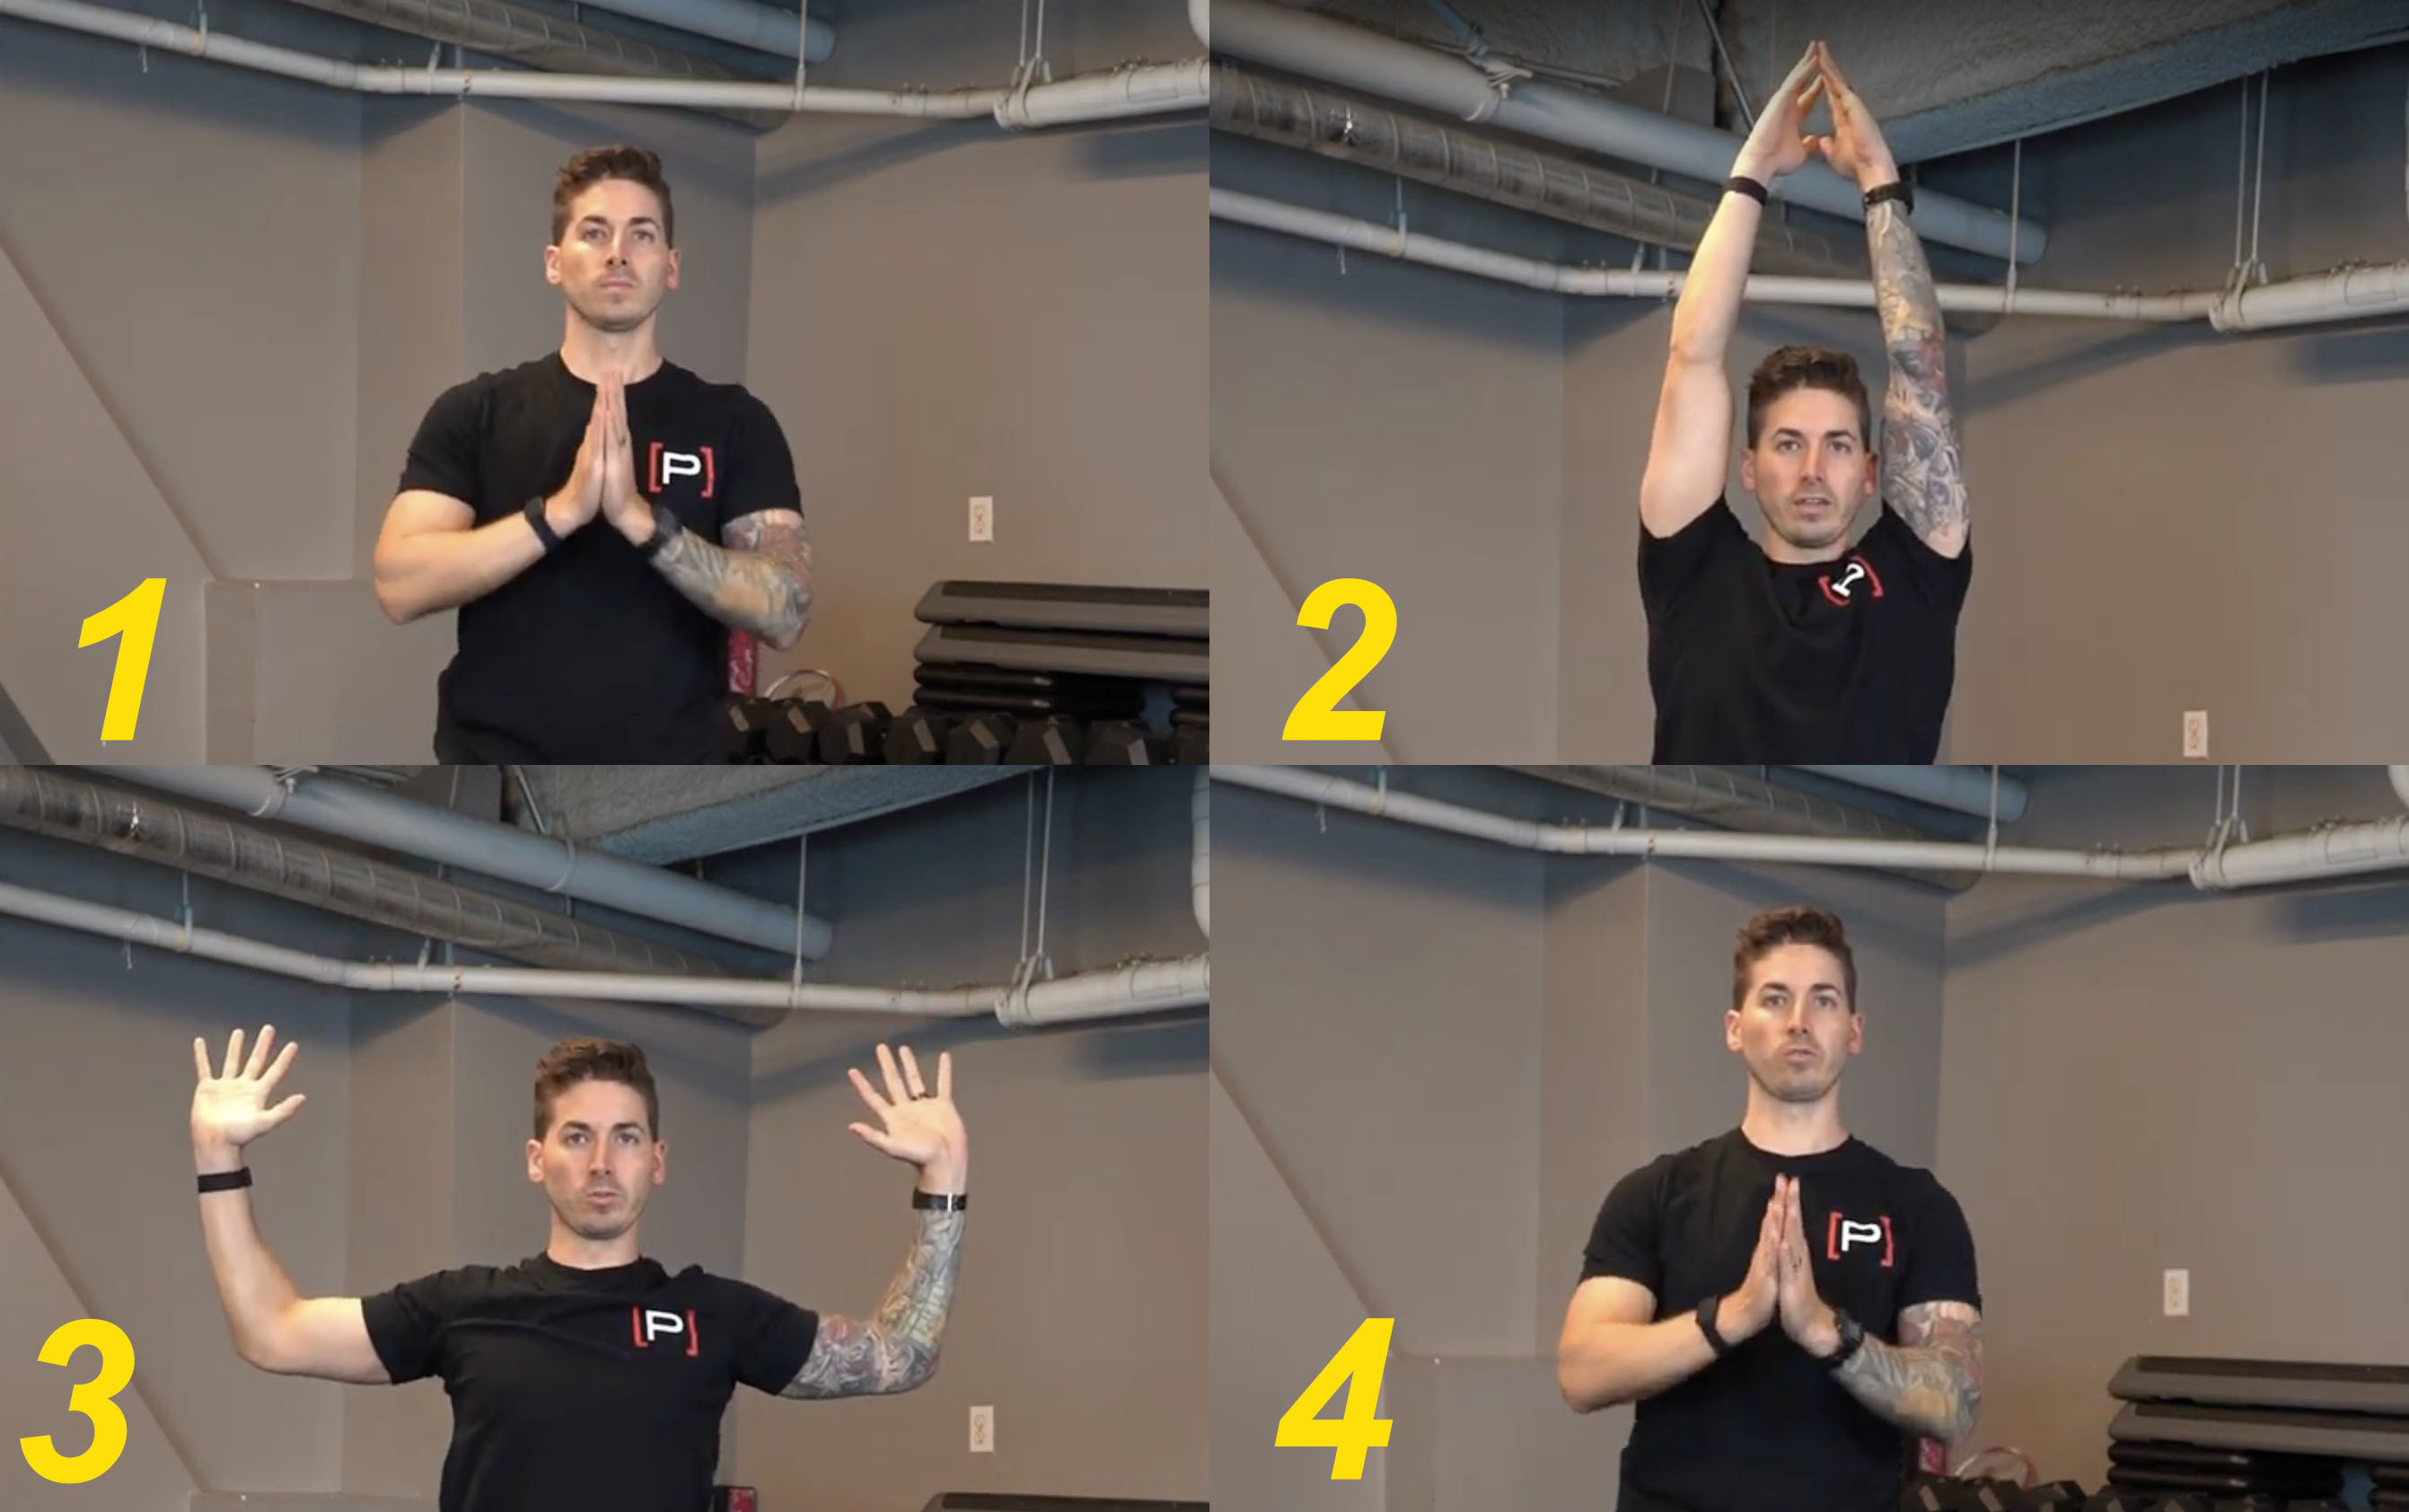 Dr. Craig Lindell demonstrates a standing sunrise salute stretch